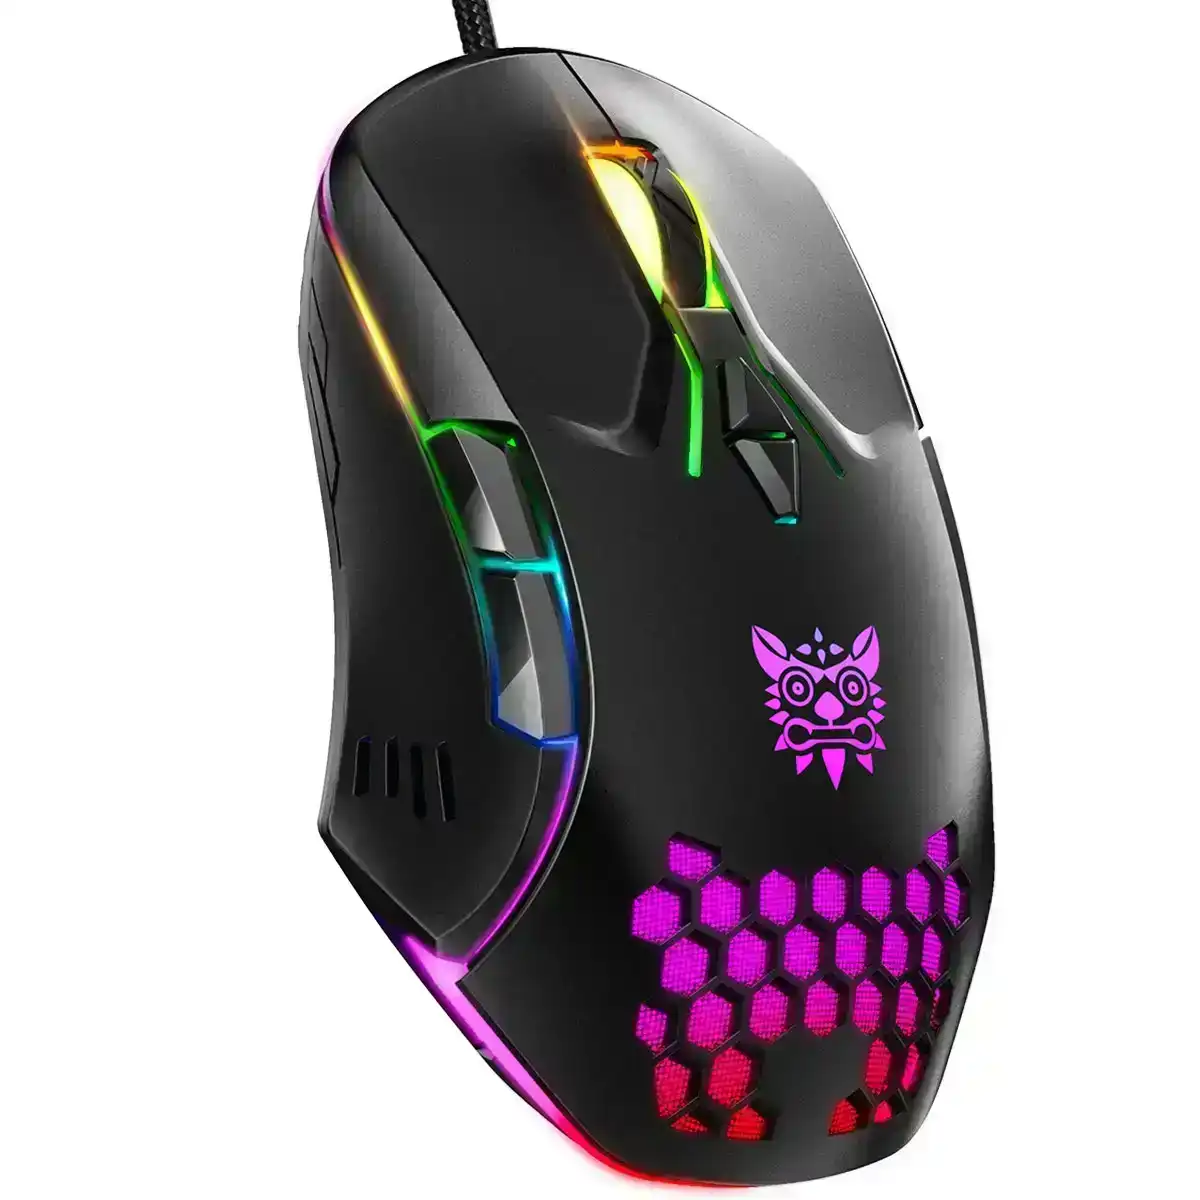 Onikuma CW902 Wired Gaming Mouse 6400DPI RGB Backlight Computer Mouse Hollow Honeycomb Mice for Computer Laptop PC Gamer